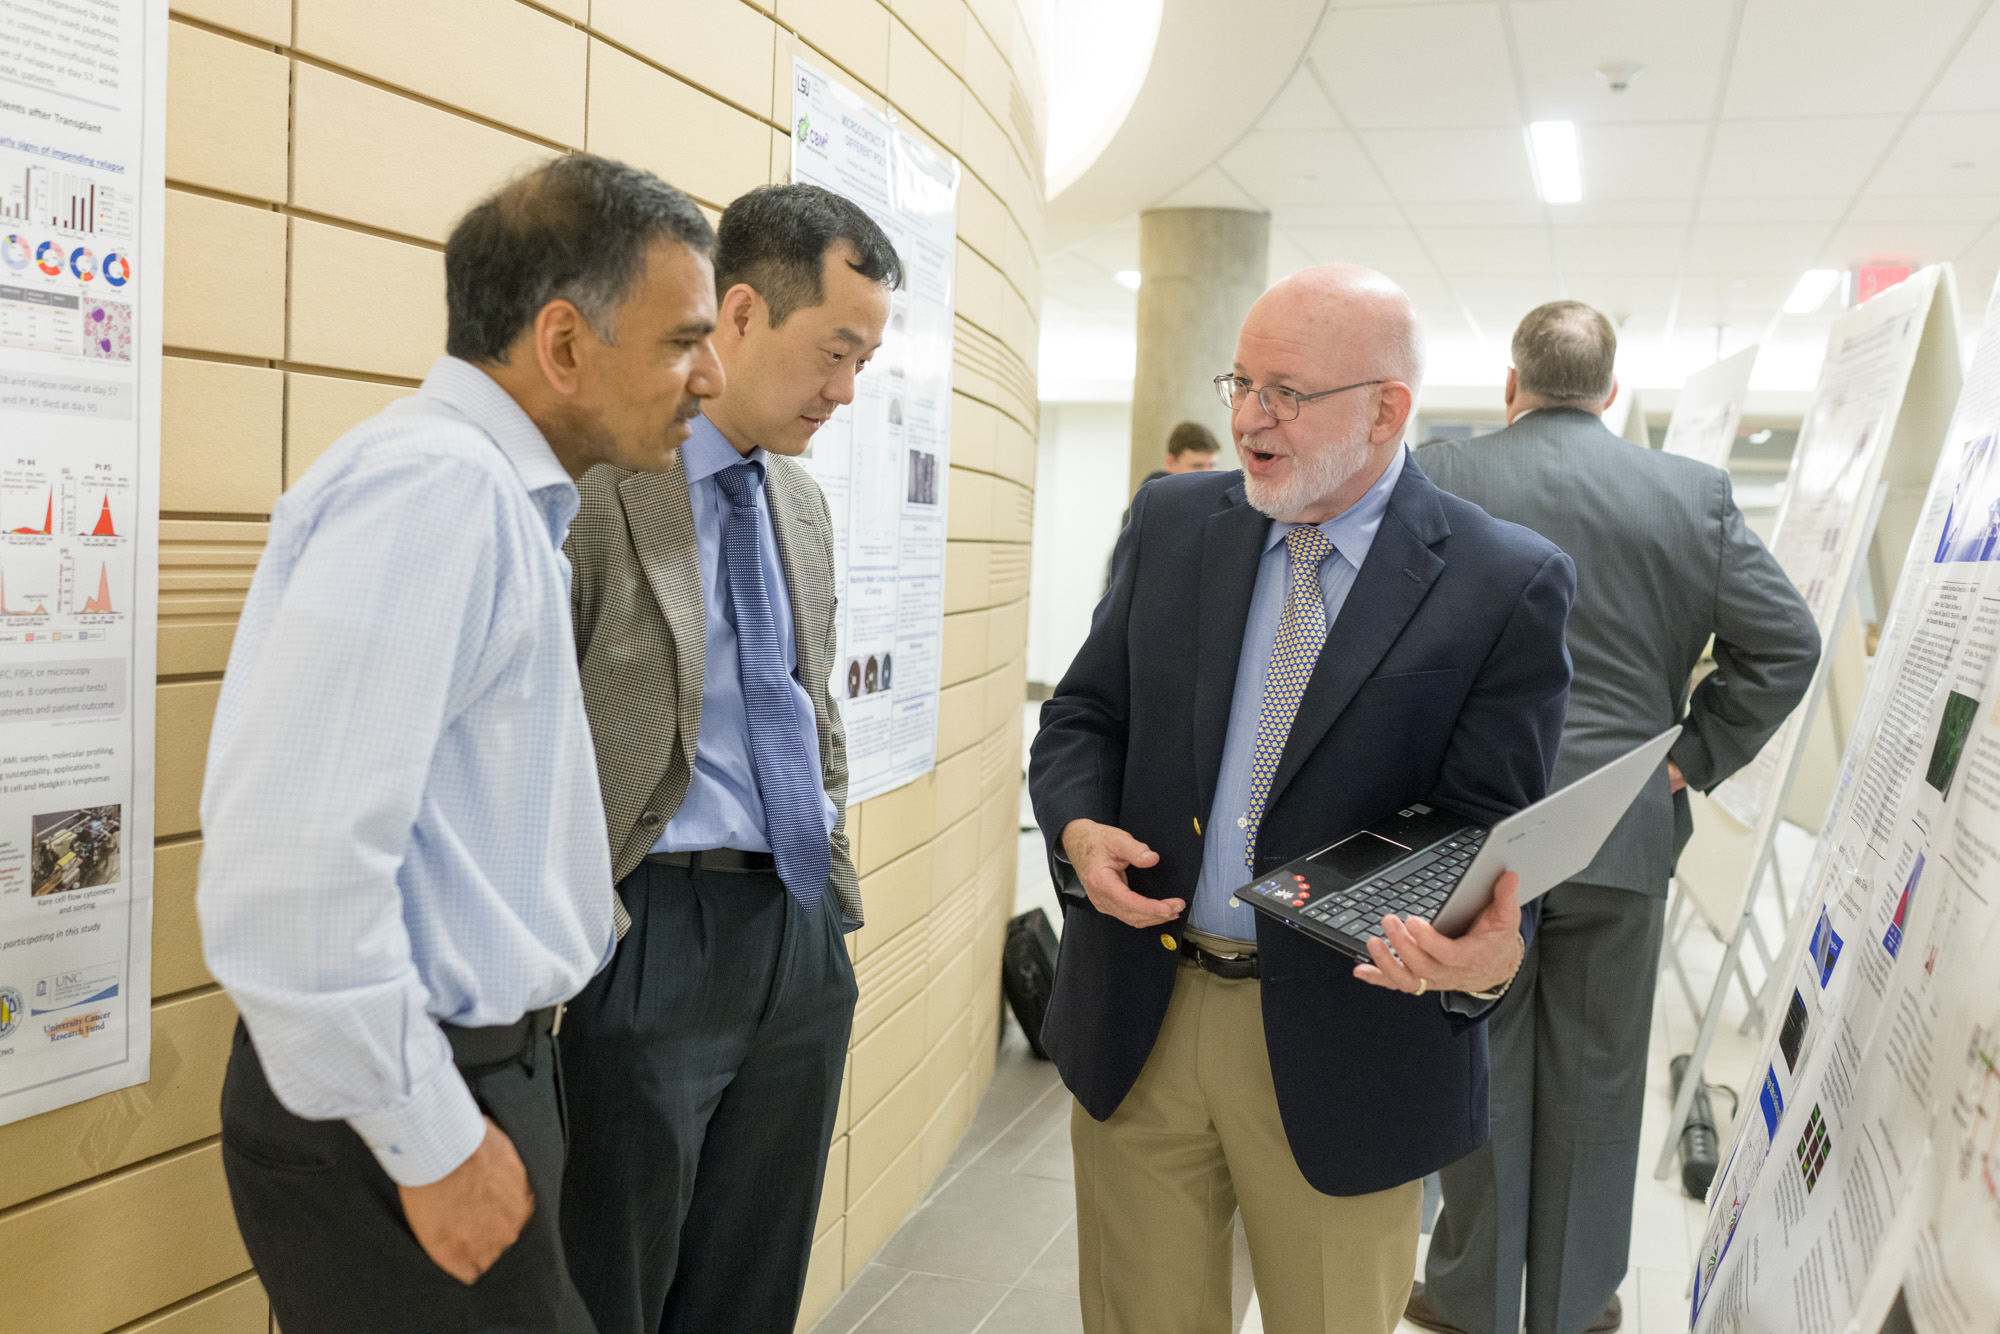 Three professionals discuss scientific posters in a hallway. One gentleman with a laptop shares insights with two other men.